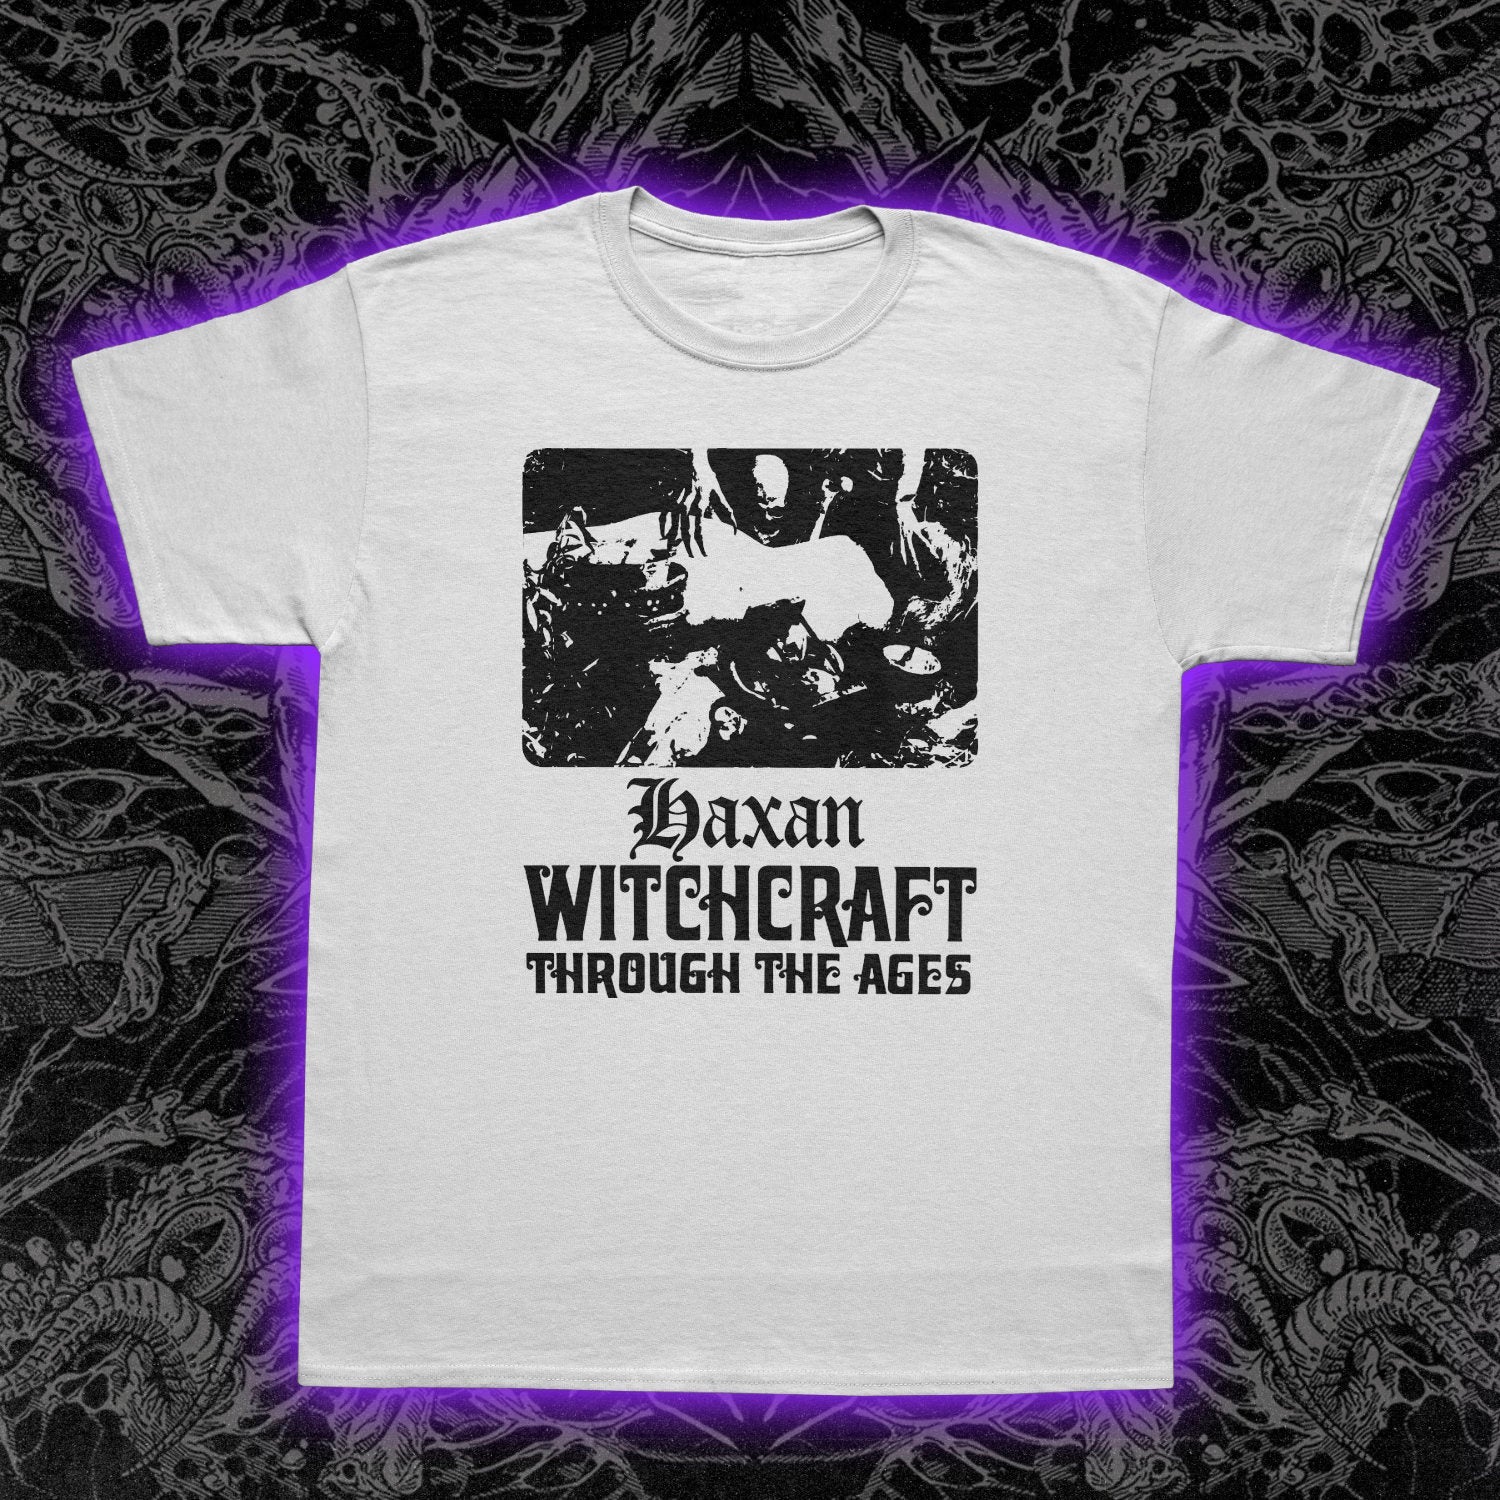 Haxan Witchcraft Through The Ages Premium Tee